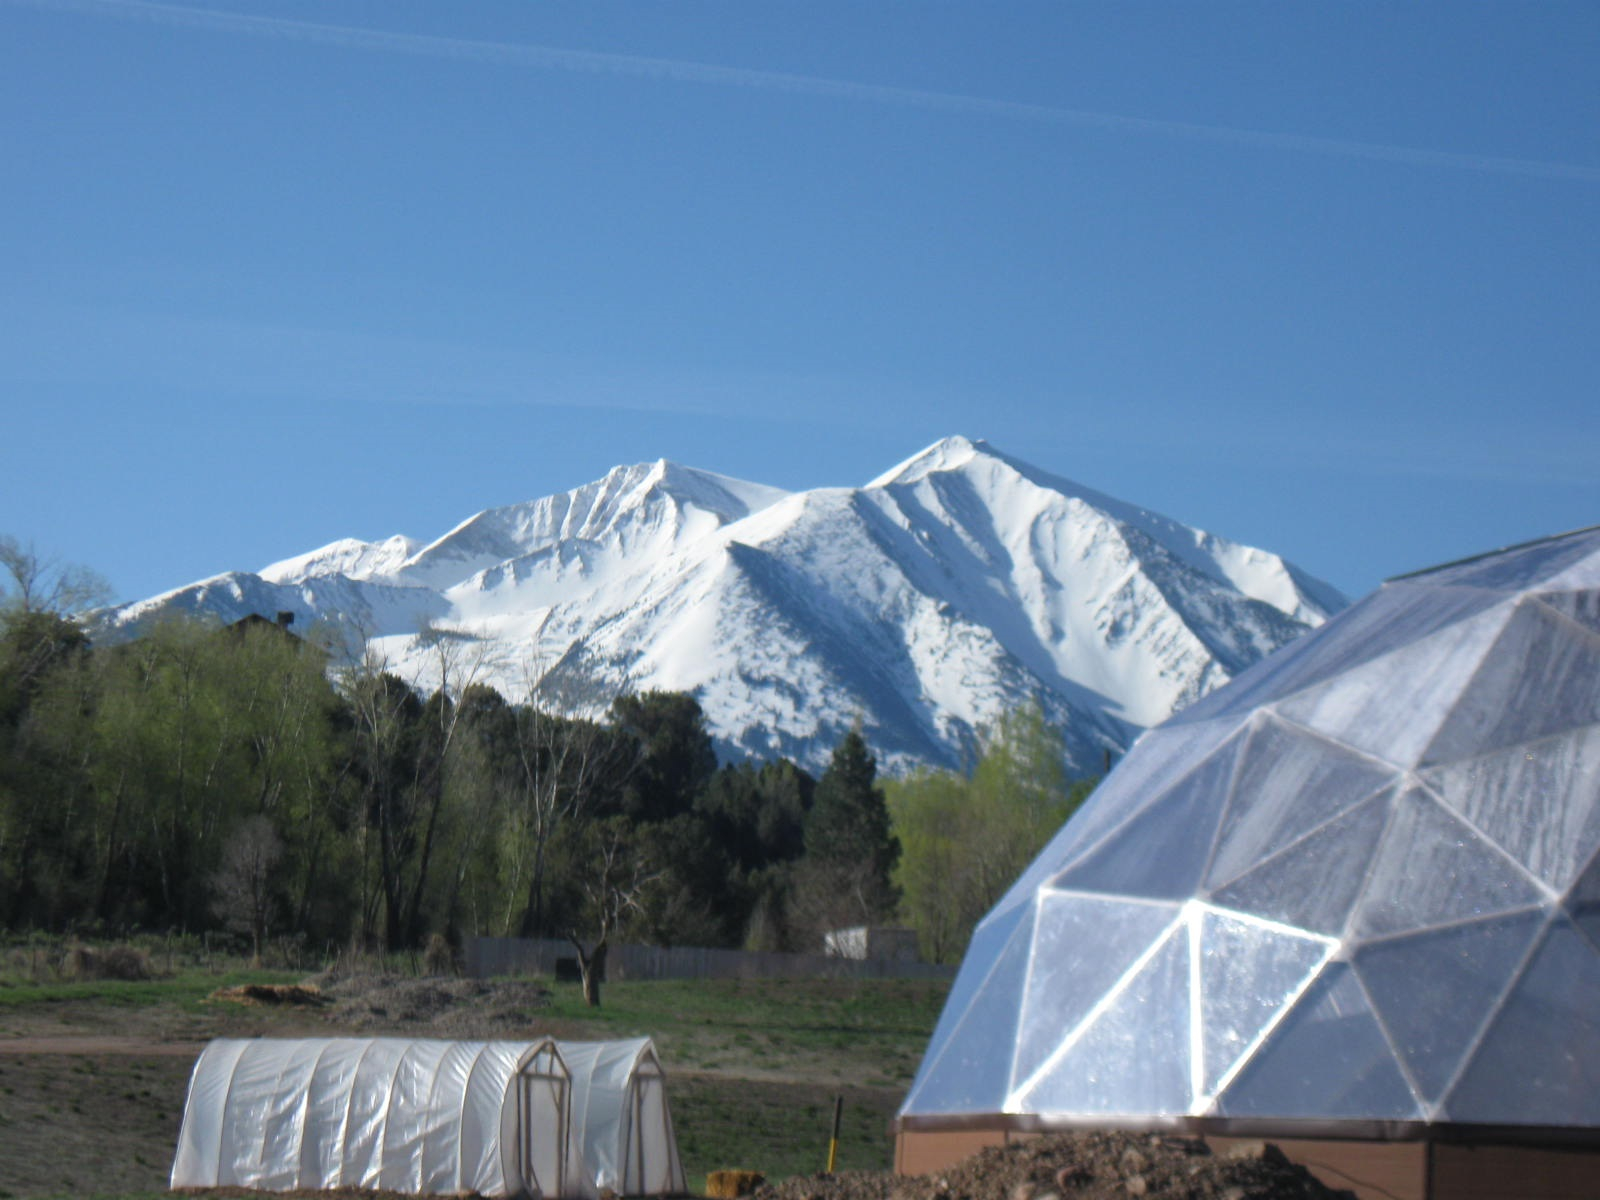 Growing Dome in Roaring Fork Valley